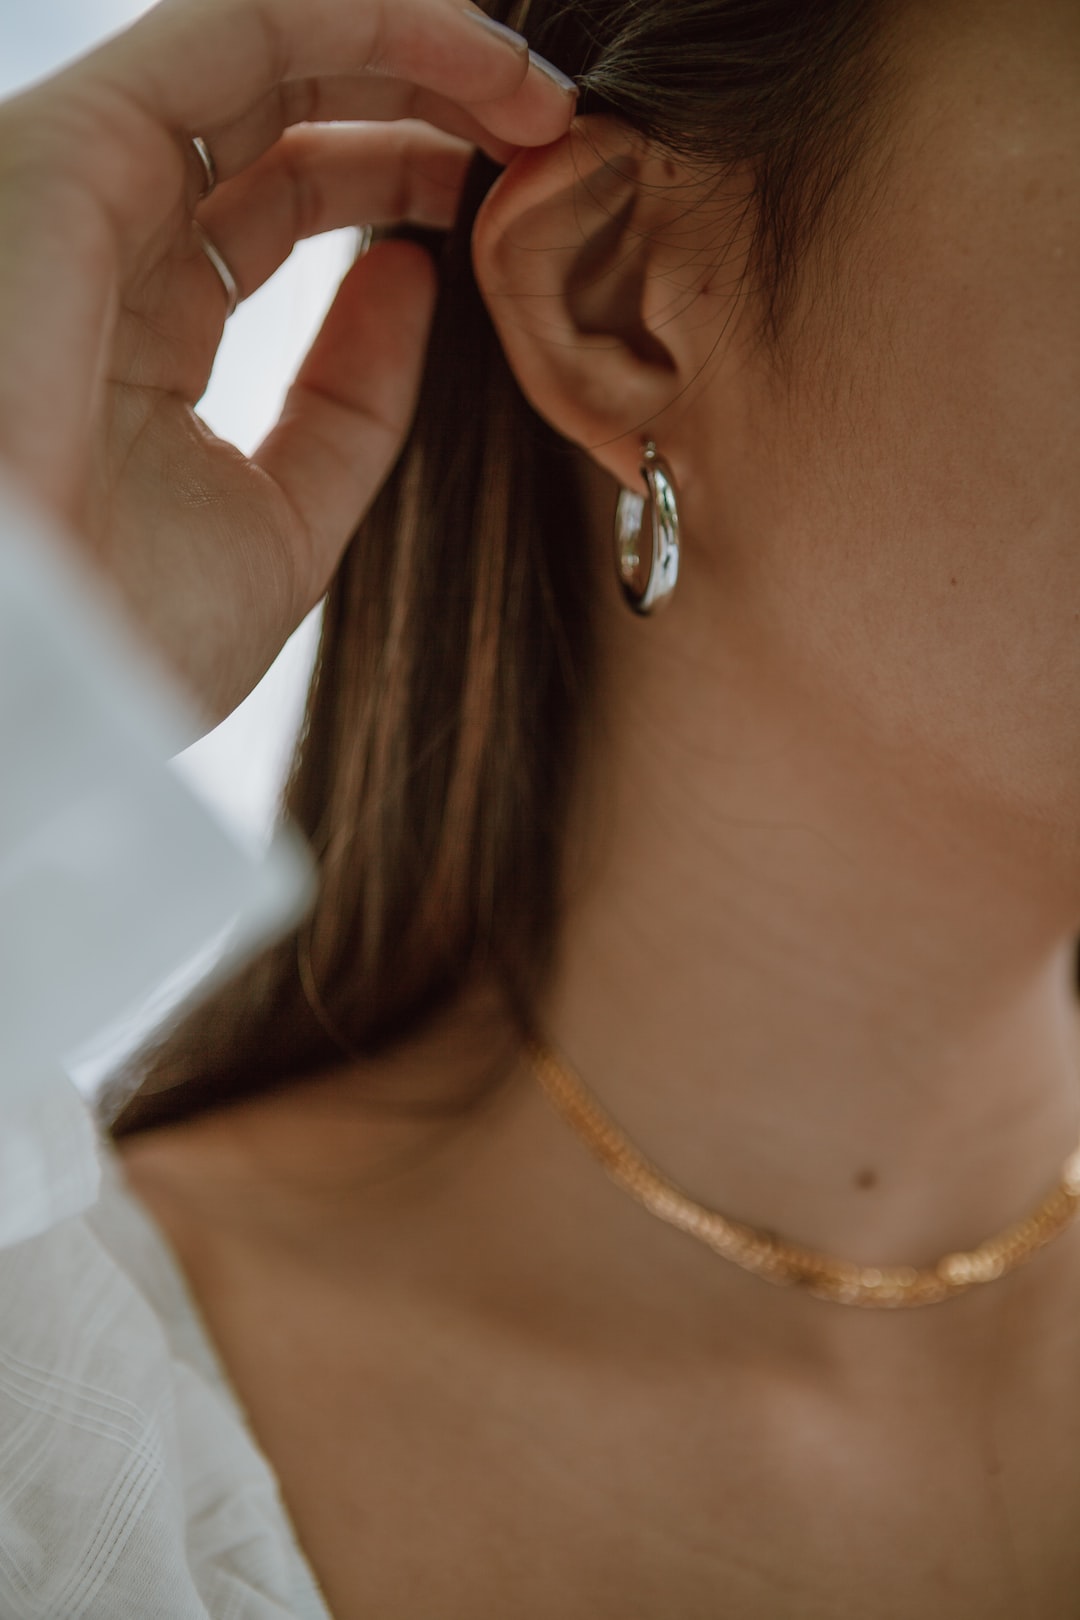 Silver Sterling Jewelry for Minimalist Fashion